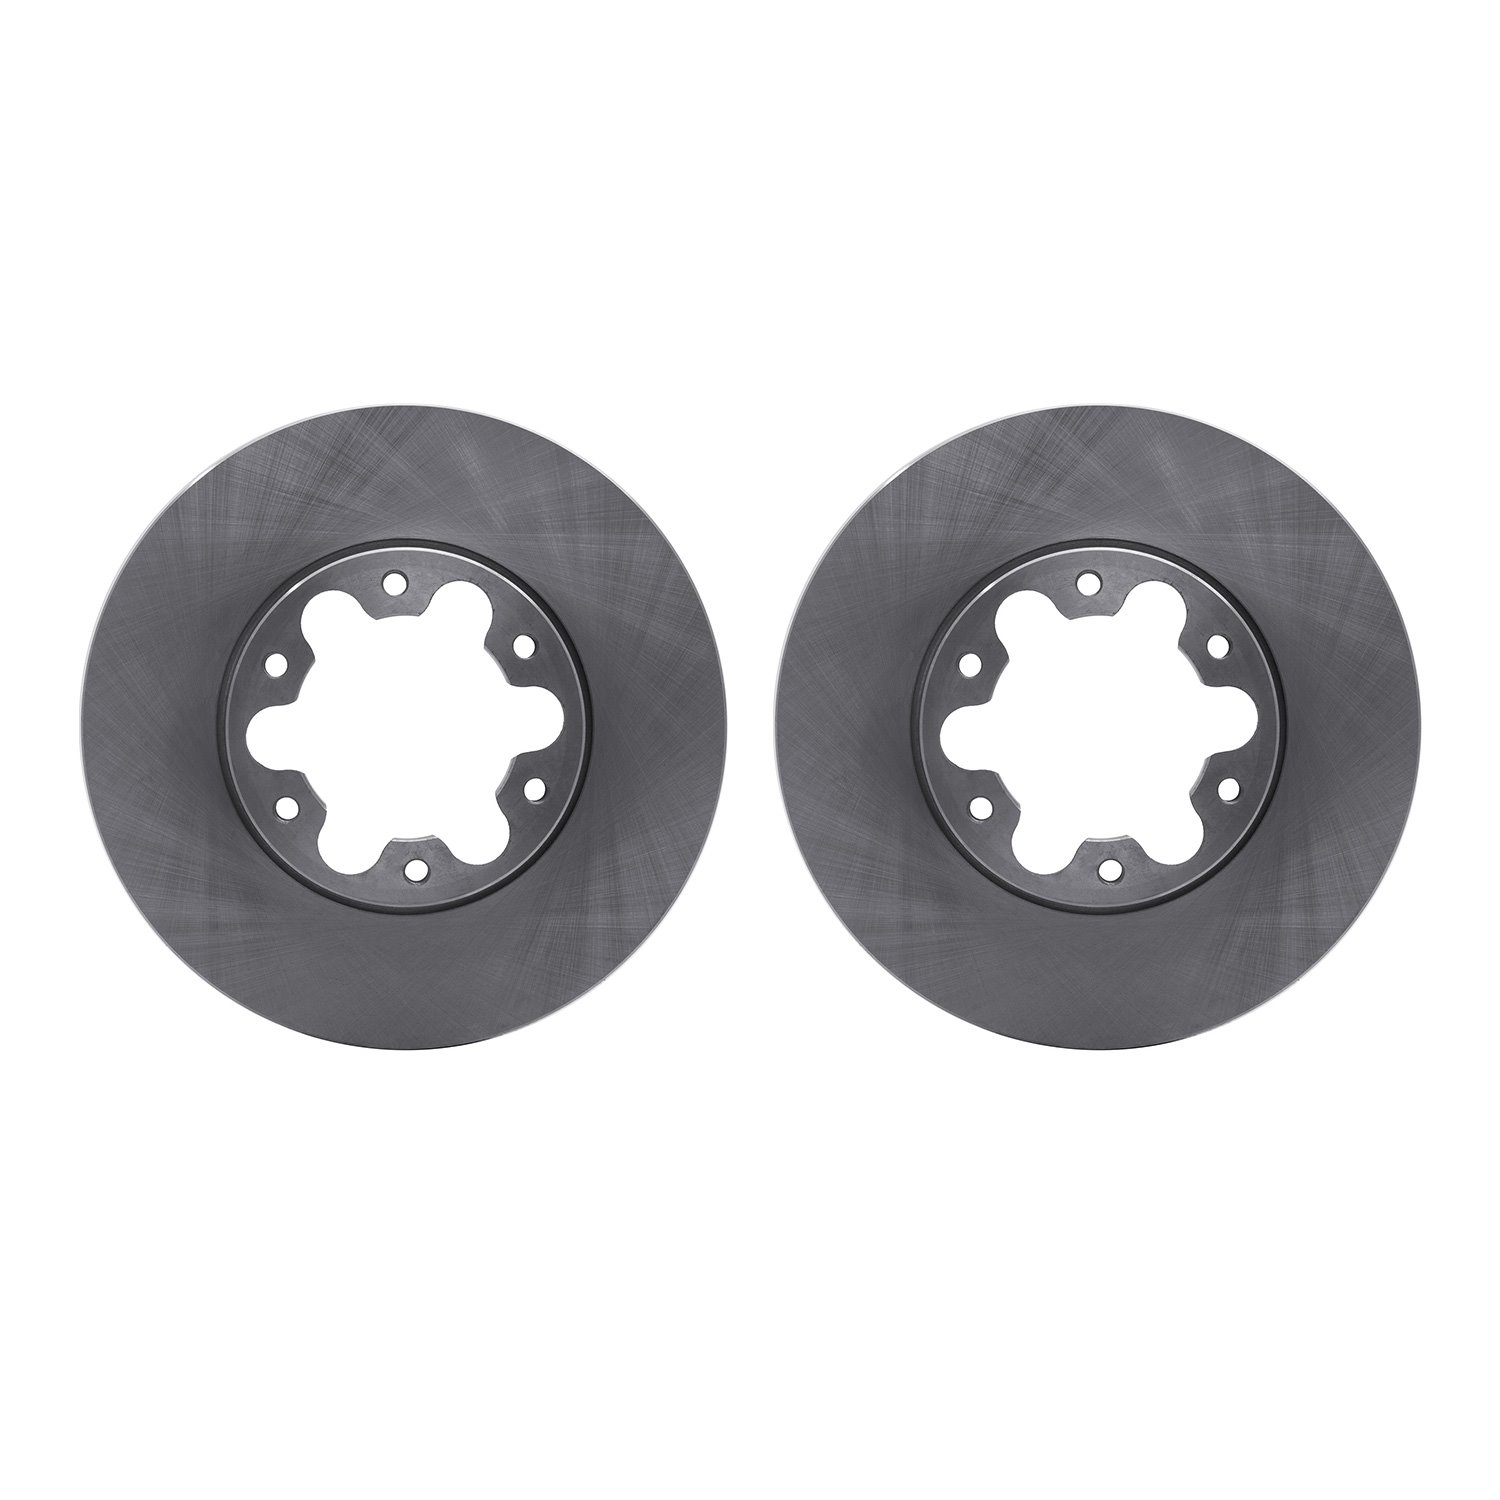 6002-54249 Brake Rotors, Fits Select Ford/Lincoln/Mercury/Mazda, Position: Front